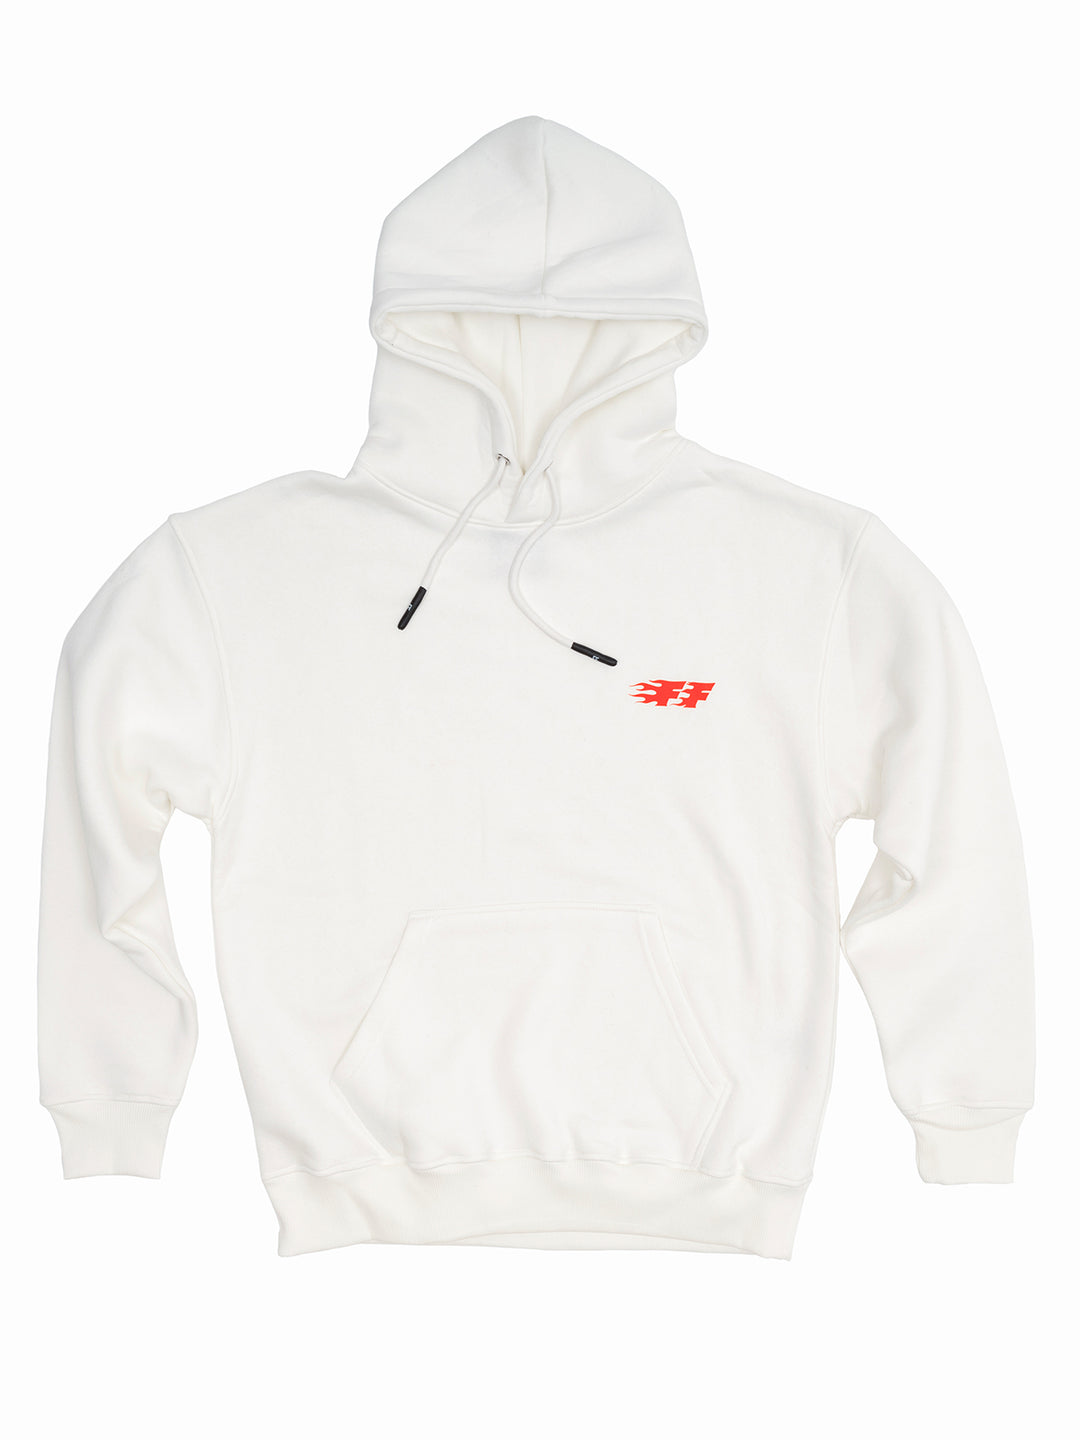 FF Feuerball / Oversized Pullover Hoodie